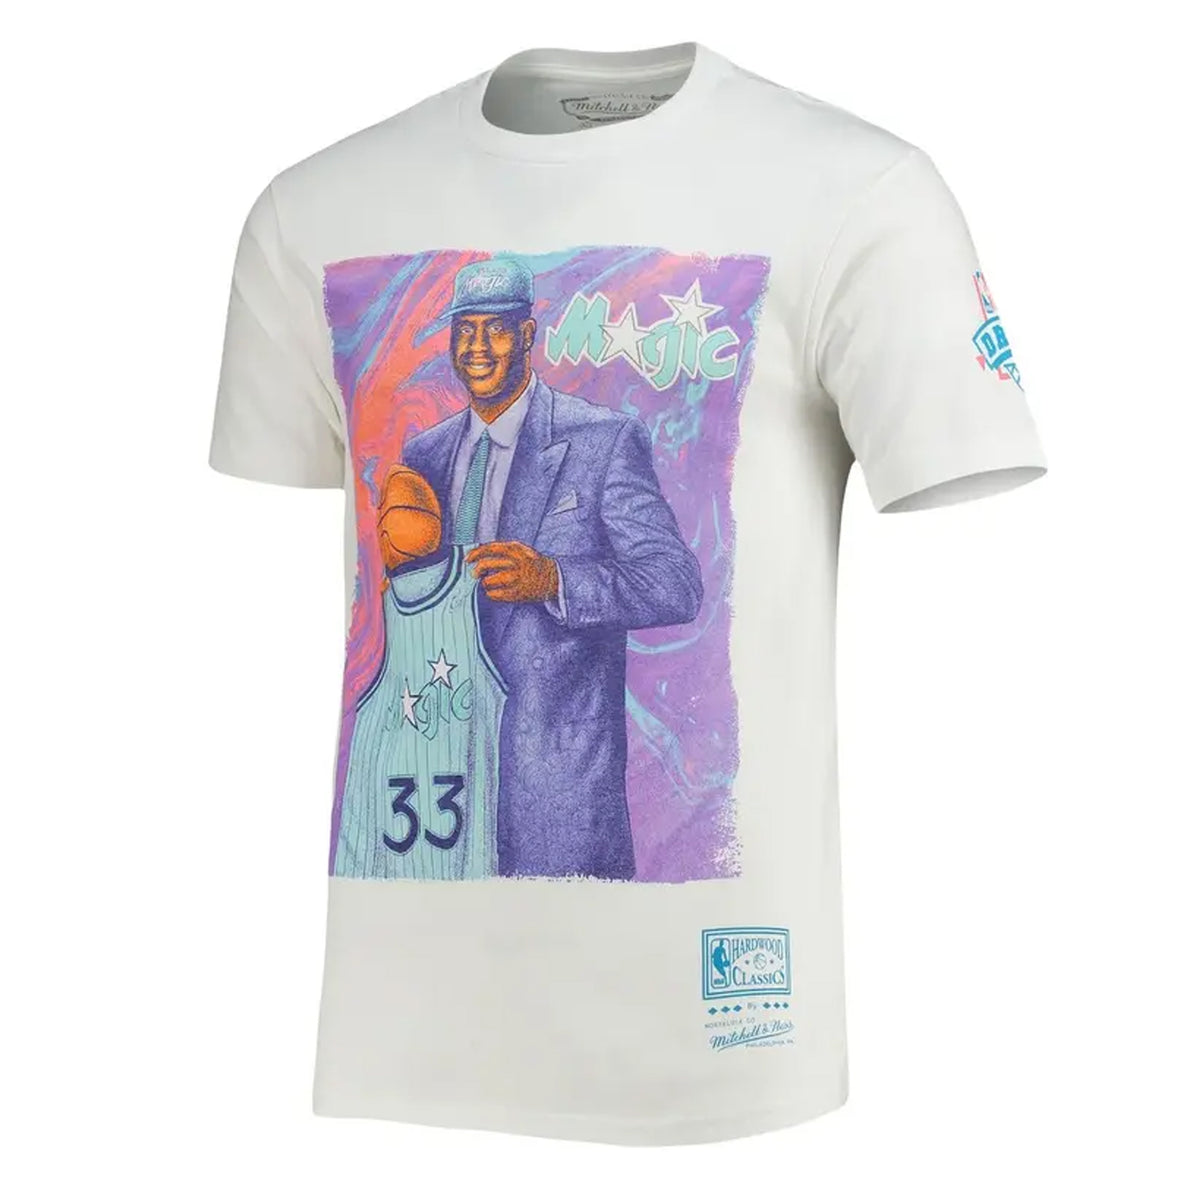 Mitchell & Ness Men's Draft Day Colorwash T-Shirt - Orlando Magic Shaquille O'Neal Large